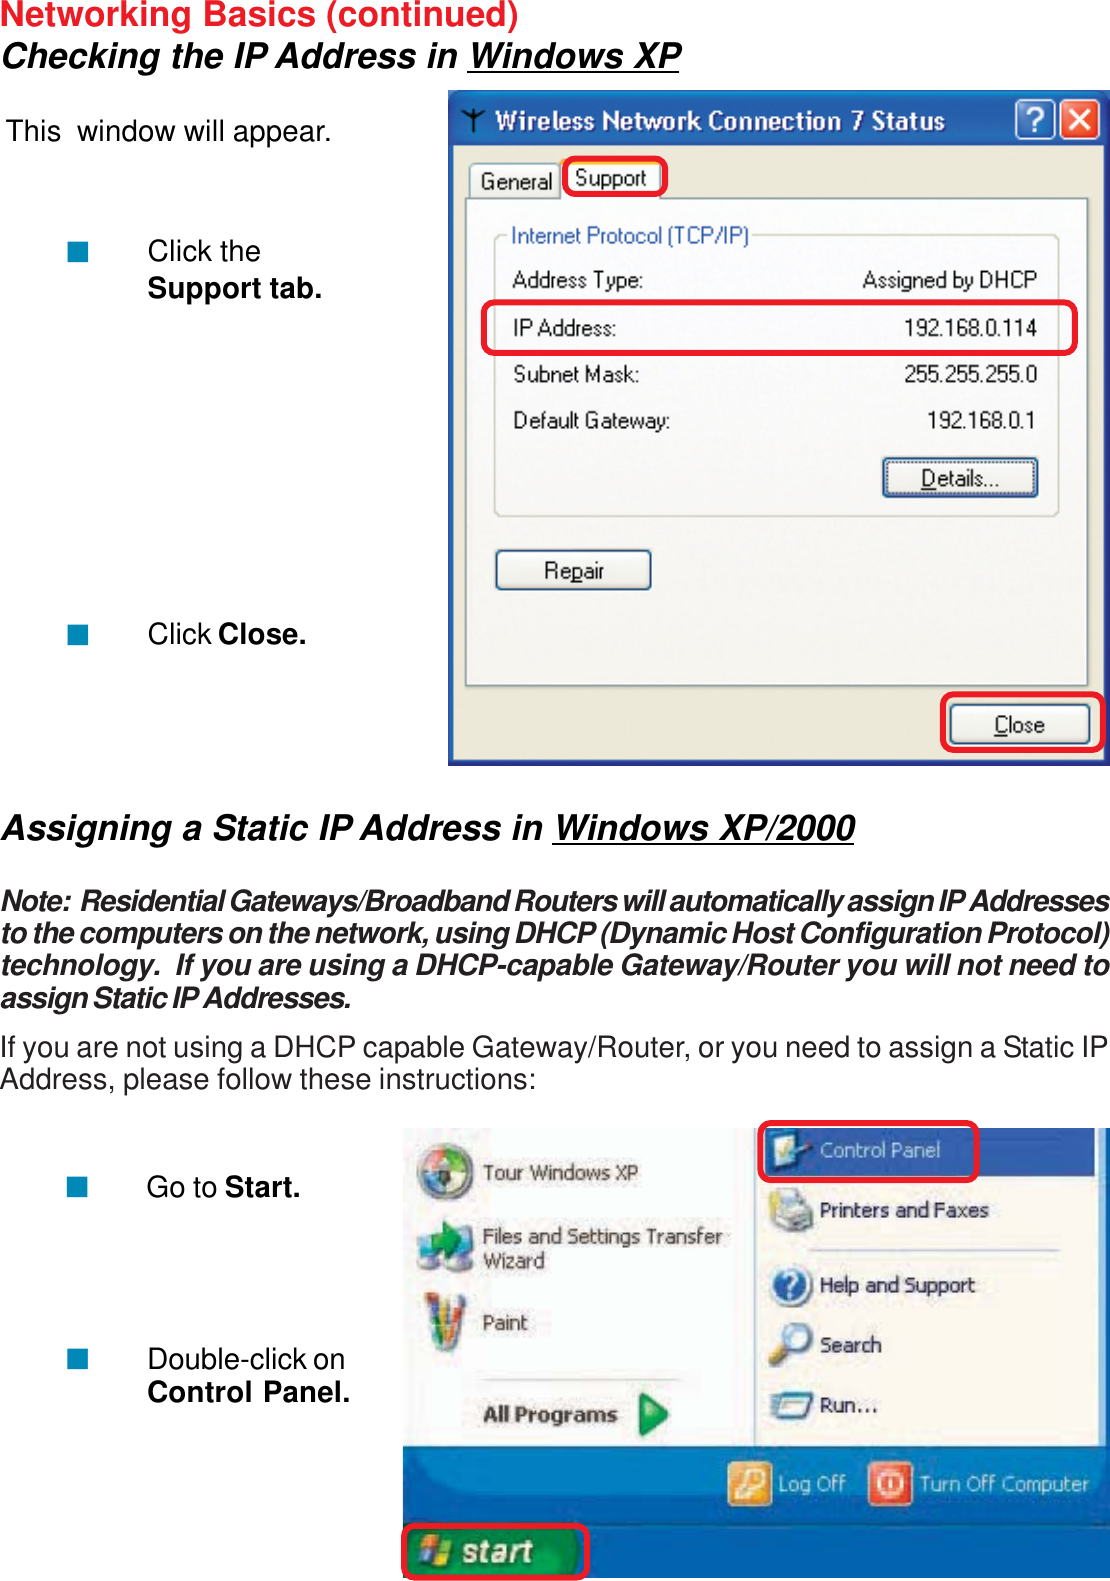 28Networking Basics (continued)Checking the IP Address in Windows XPThis  window will appear.Click theSupport tab.Click Close.Assigning a Static IP Address in Windows XP/2000Note:  Residential Gateways/Broadband Routers will automatically assign IP Addressesto the computers on the network, using DHCP (Dynamic Host Configuration Protocol)technology.  If you are using a DHCP-capable Gateway/Router you will not need toassign Static IP Addresses.If you are not using a DHCP capable Gateway/Router, or you need to assign a Static IPAddress, please follow these instructions:Go to Start.Double-click onControl Panel.